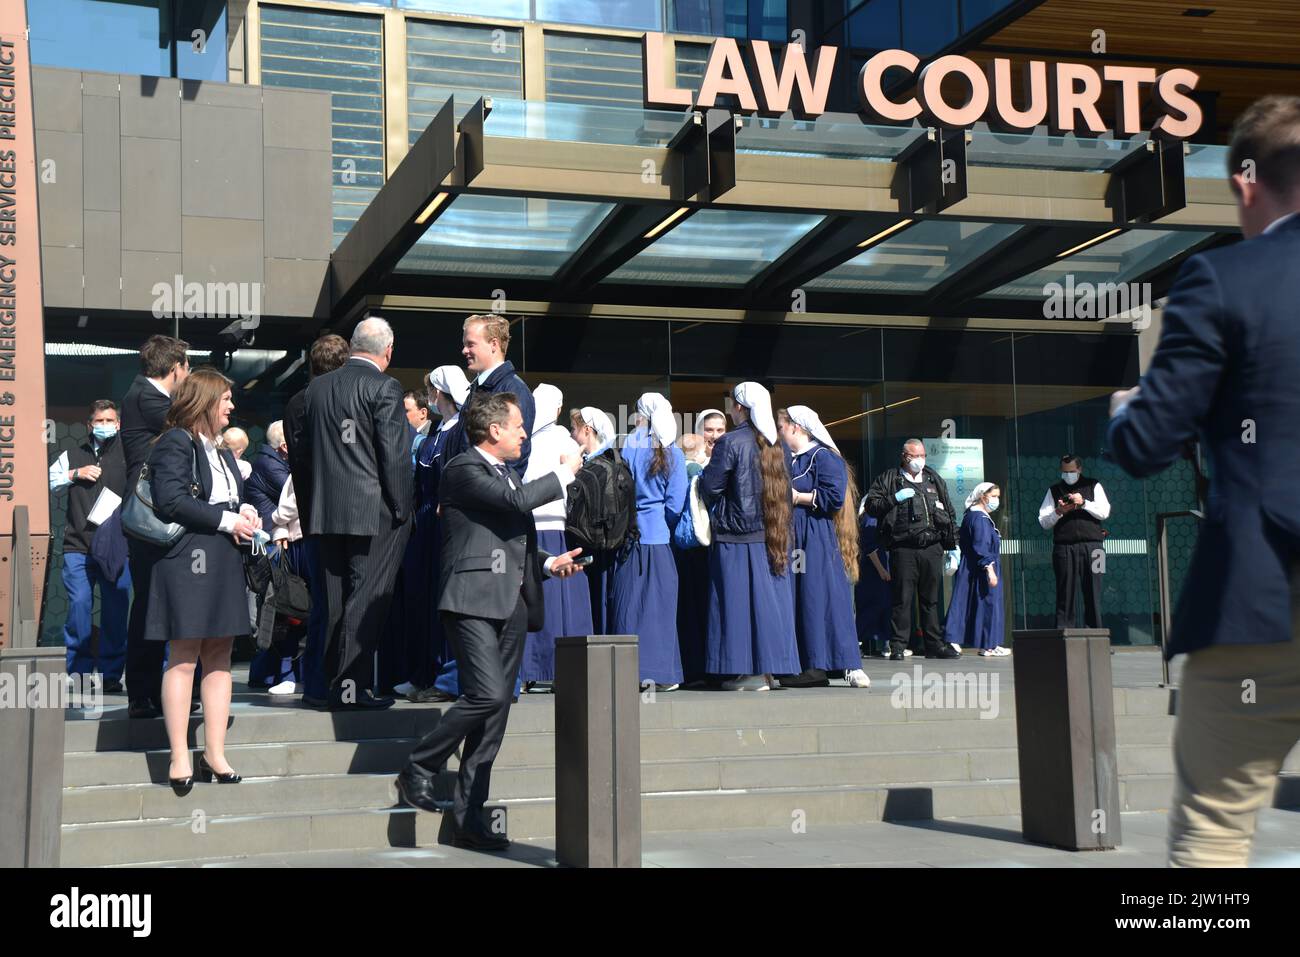 CHRISTCHURCH, NEW ZEALAND, AUGUST 29, 2022: Members of the Gloriavale Christian Community gather outside the Justice Precinct building in Christchurch where a hearing was underway over the employment status of women in the community. Stock Photo